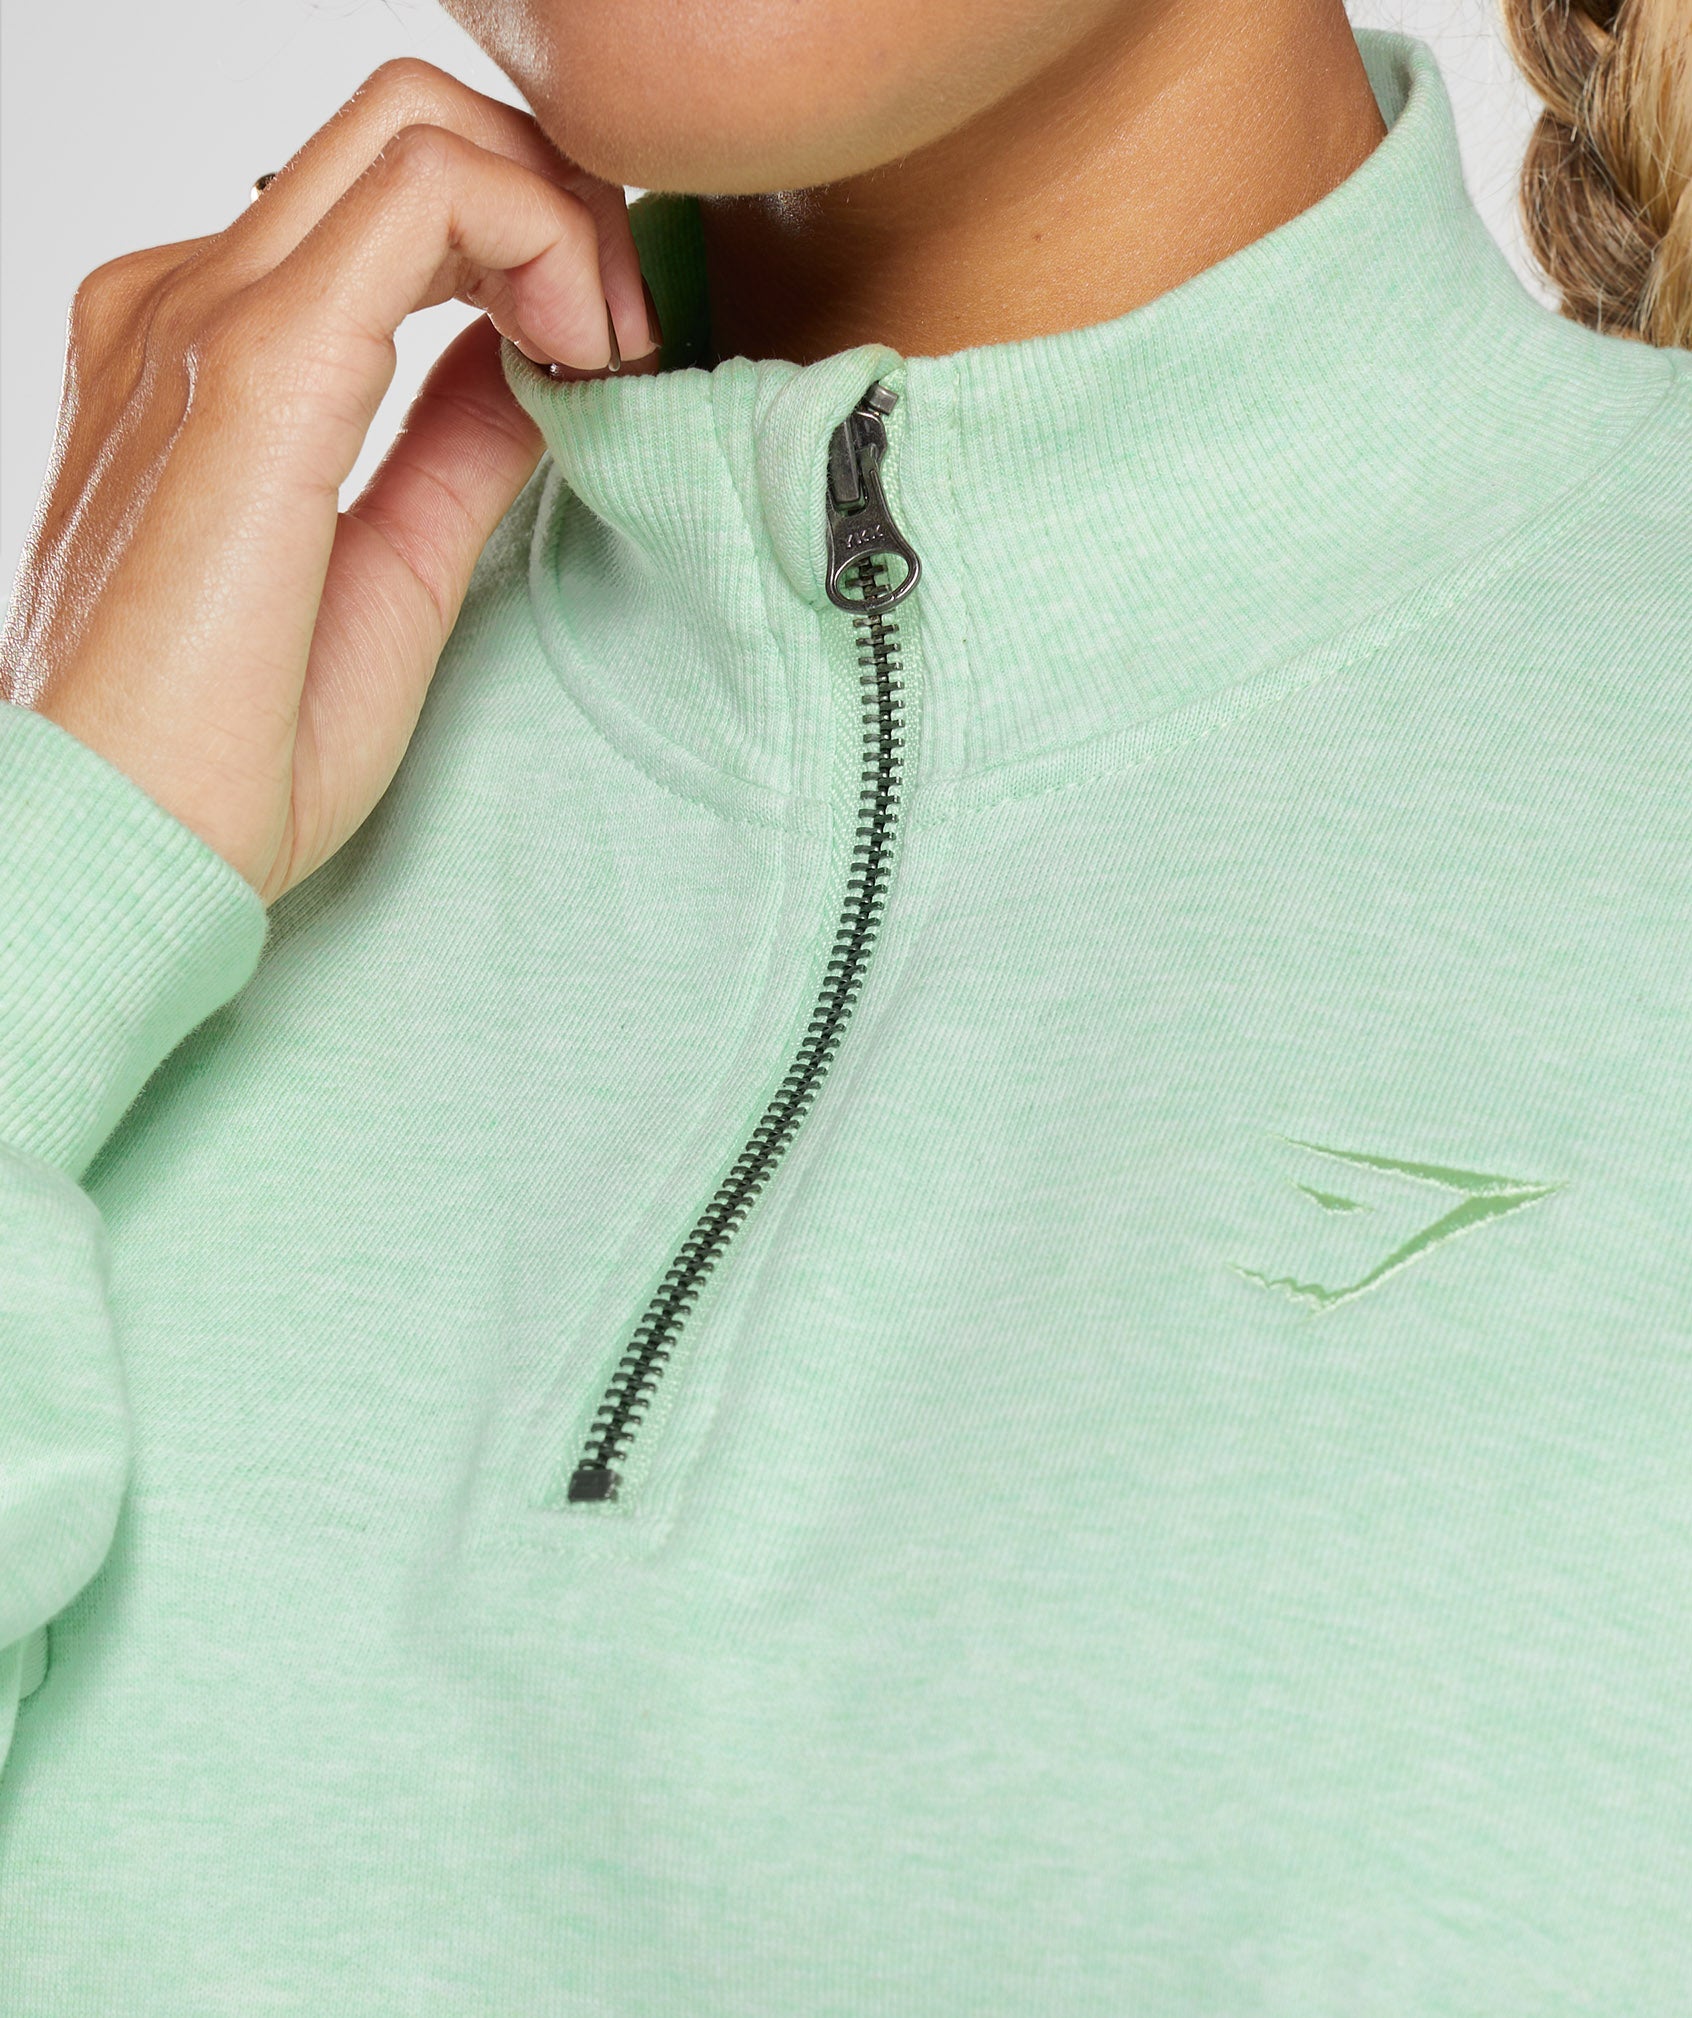 Rest Day Sweats 1/2 Zip Pullover in Refreshing Green Marl - view 6